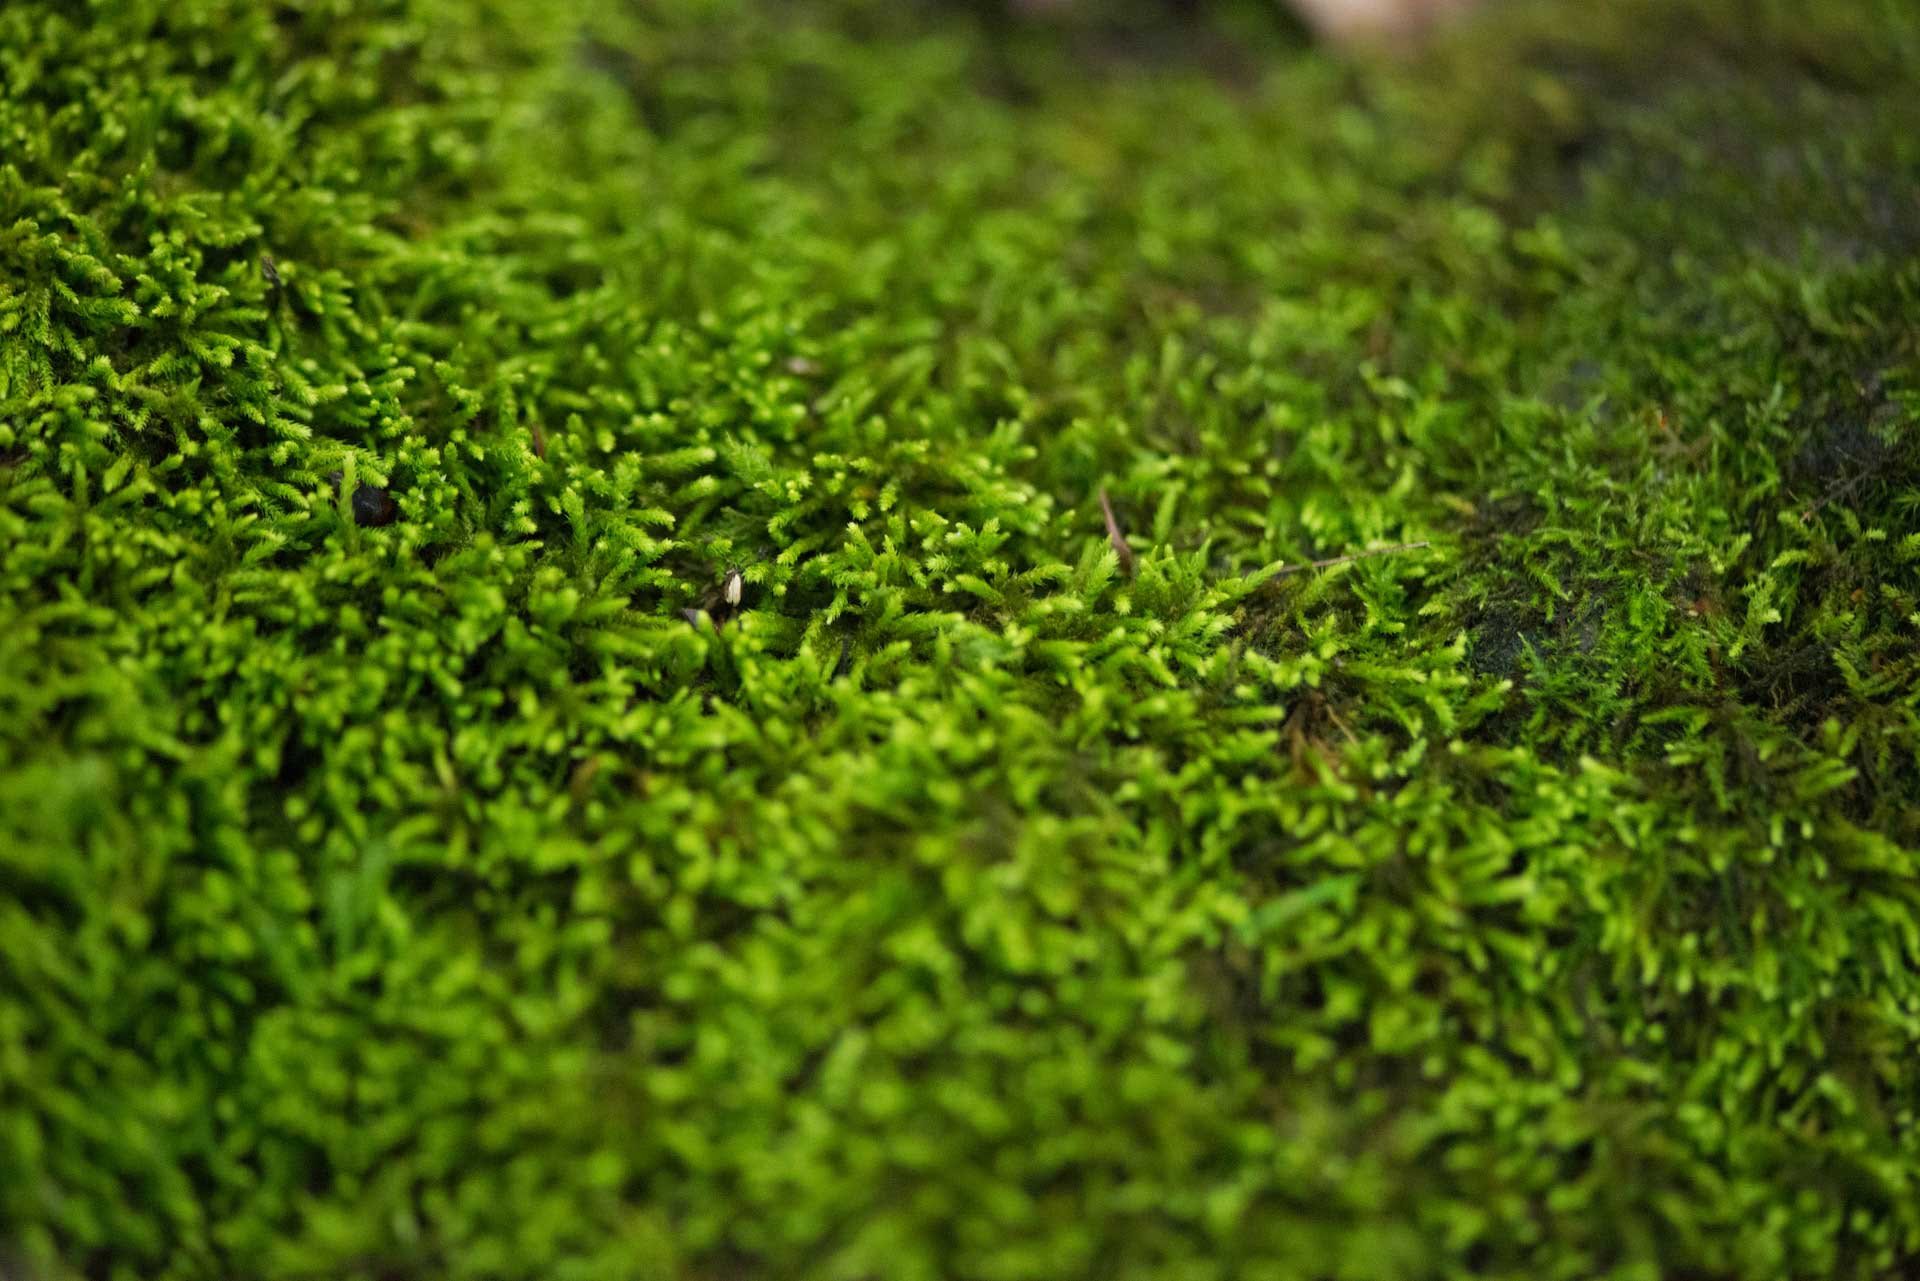 How moss makes better soil and helps combat climate change